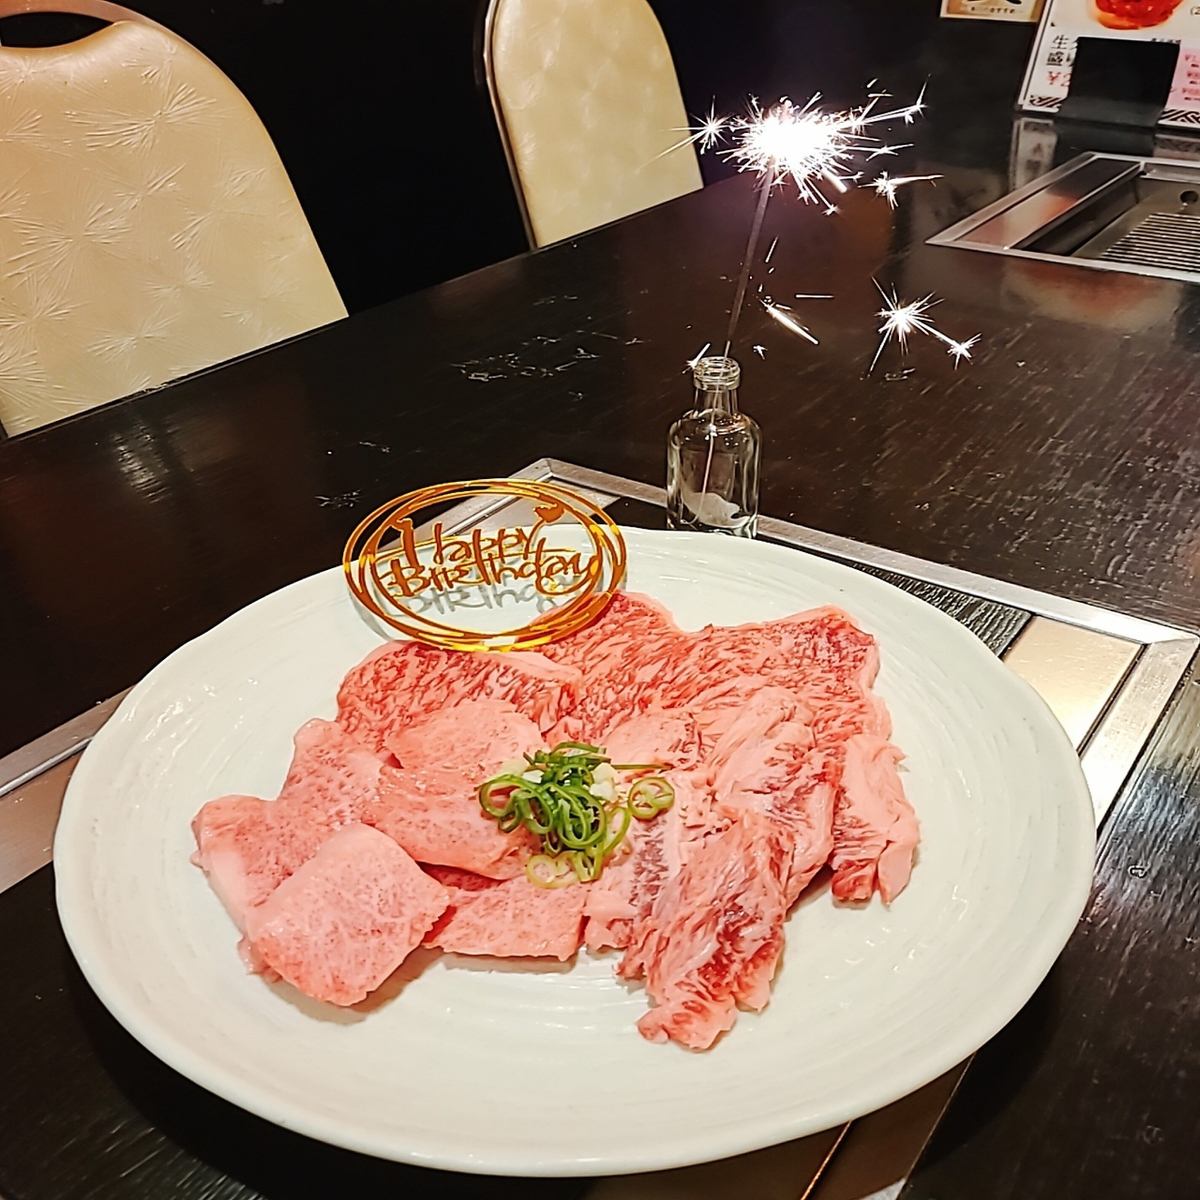 You can change 3 kinds of carefully selected Wagyu beef to birthday specifications by using coupons!